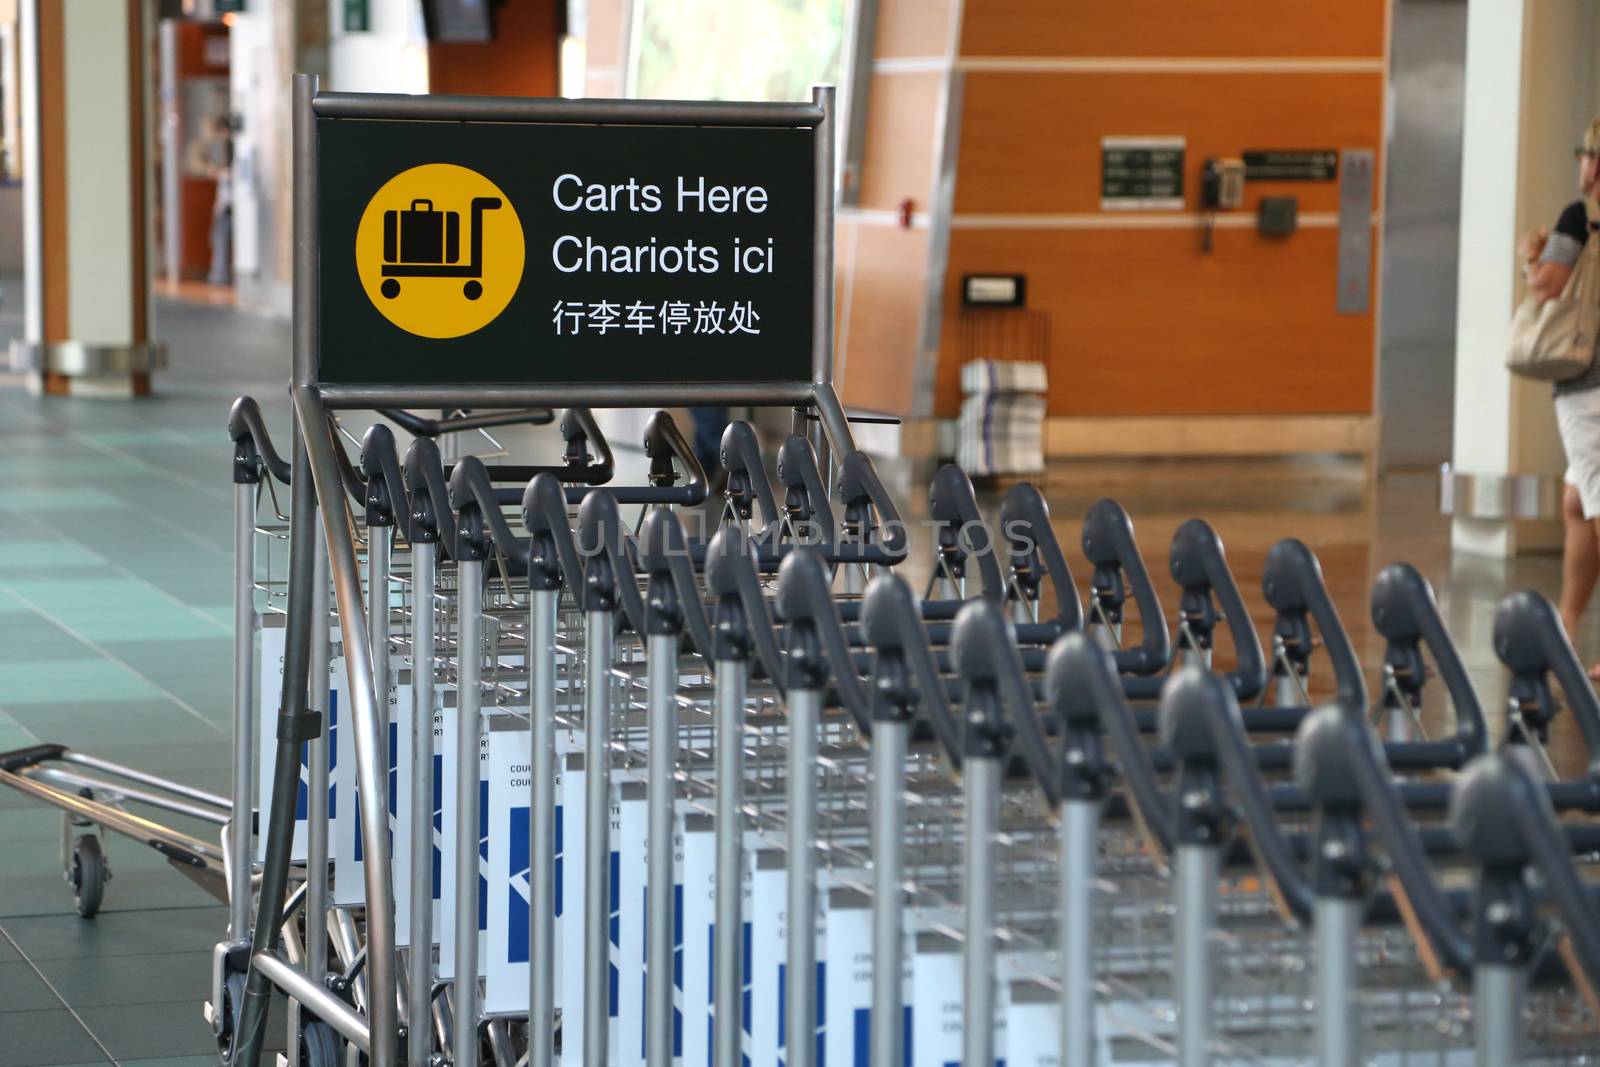 Parking carts here sign at YVR airport